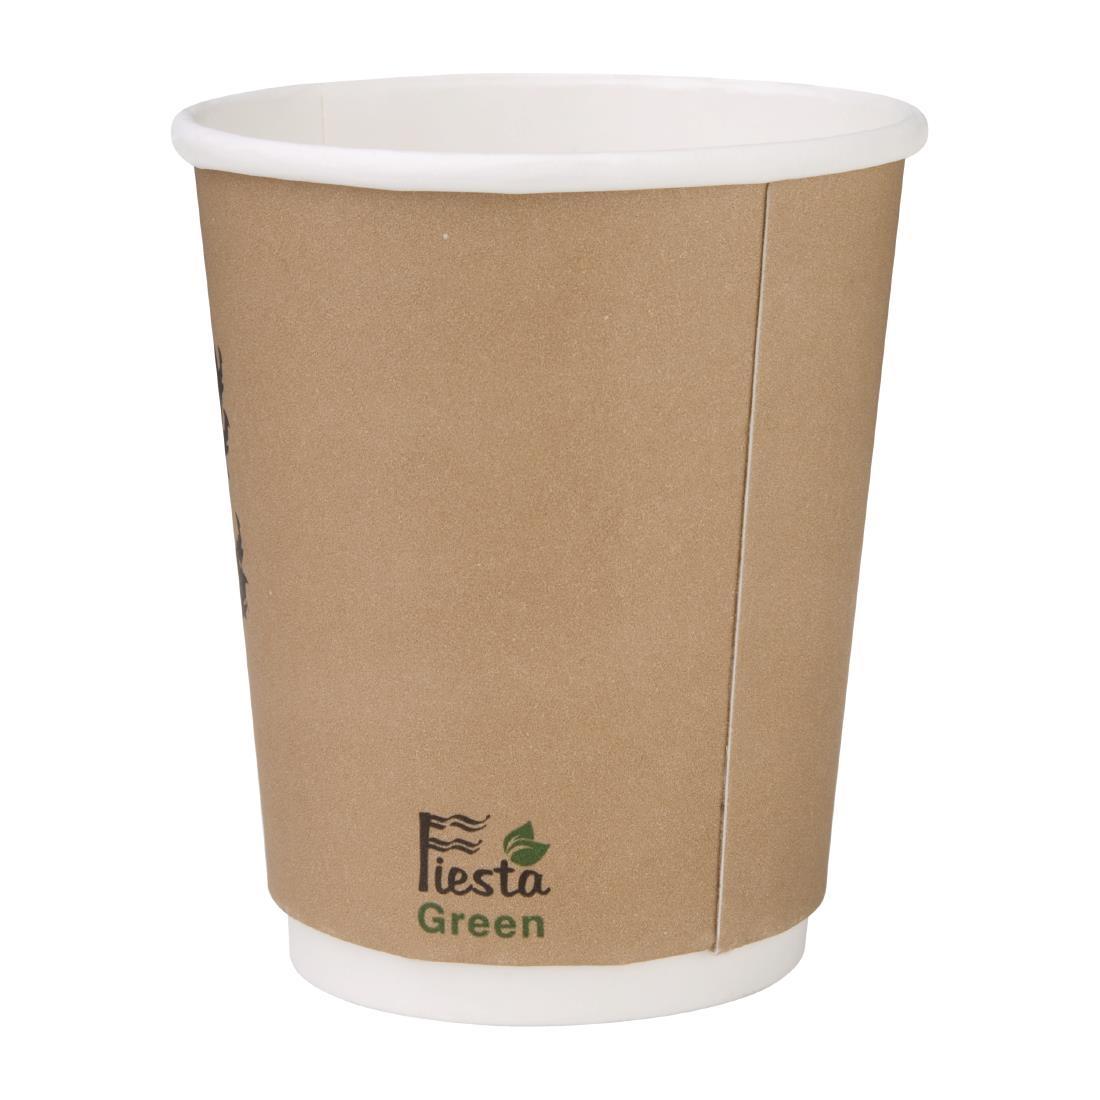 Fiesta Compostable Coffee Cups Double Wall 227ml / 8oz (Pack of 25) - DY984  - 2